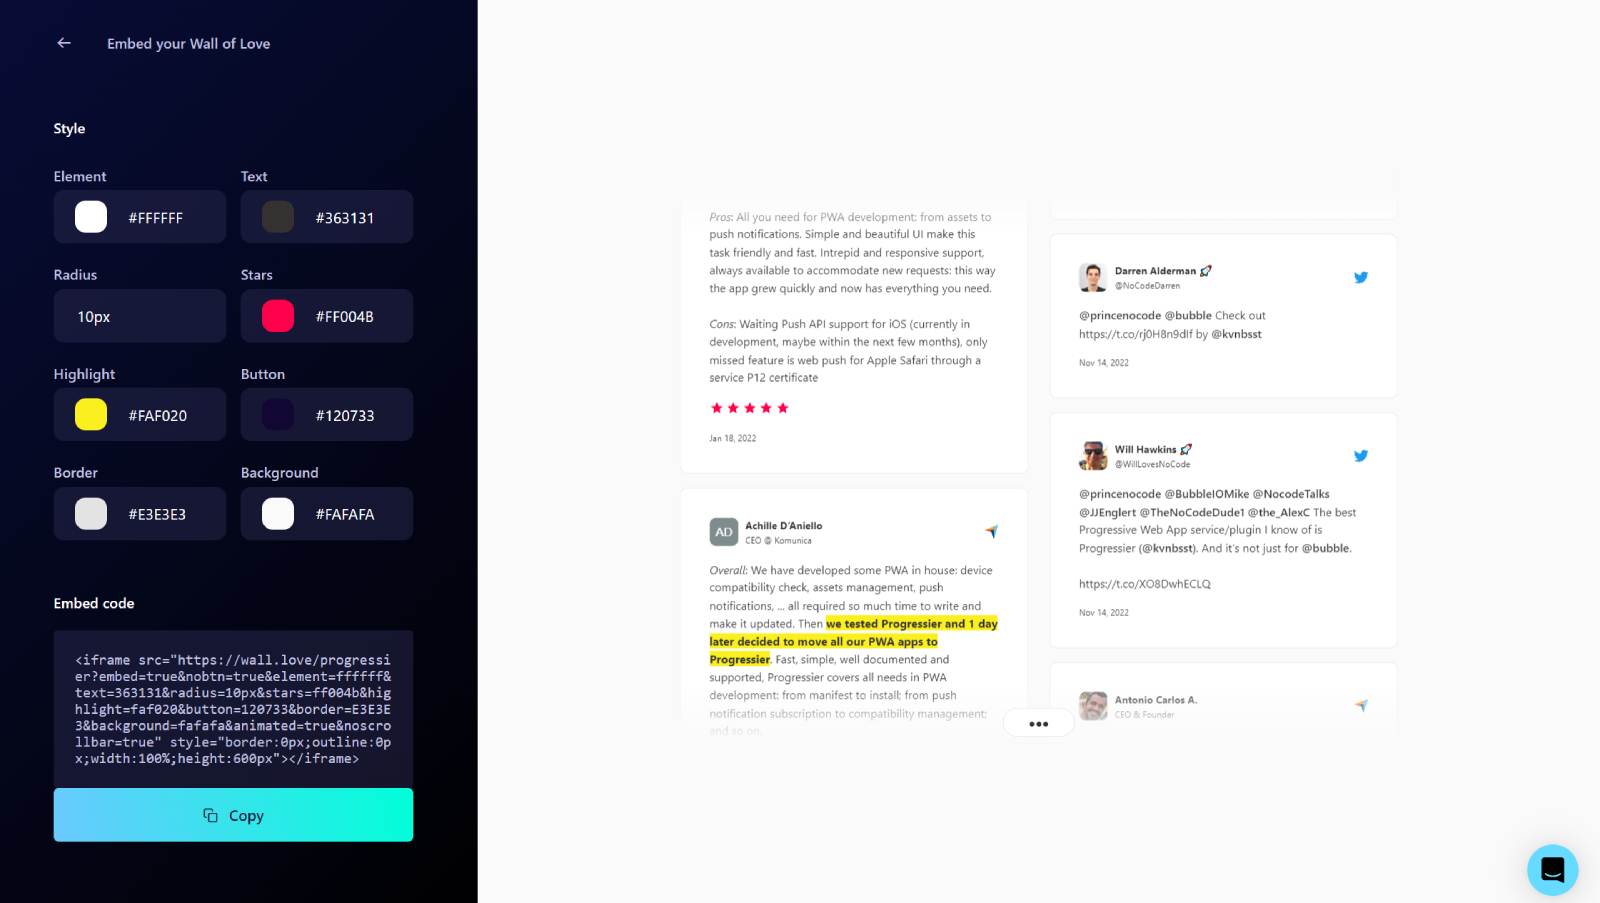 Illustration screenshot for Embed testimonials without code